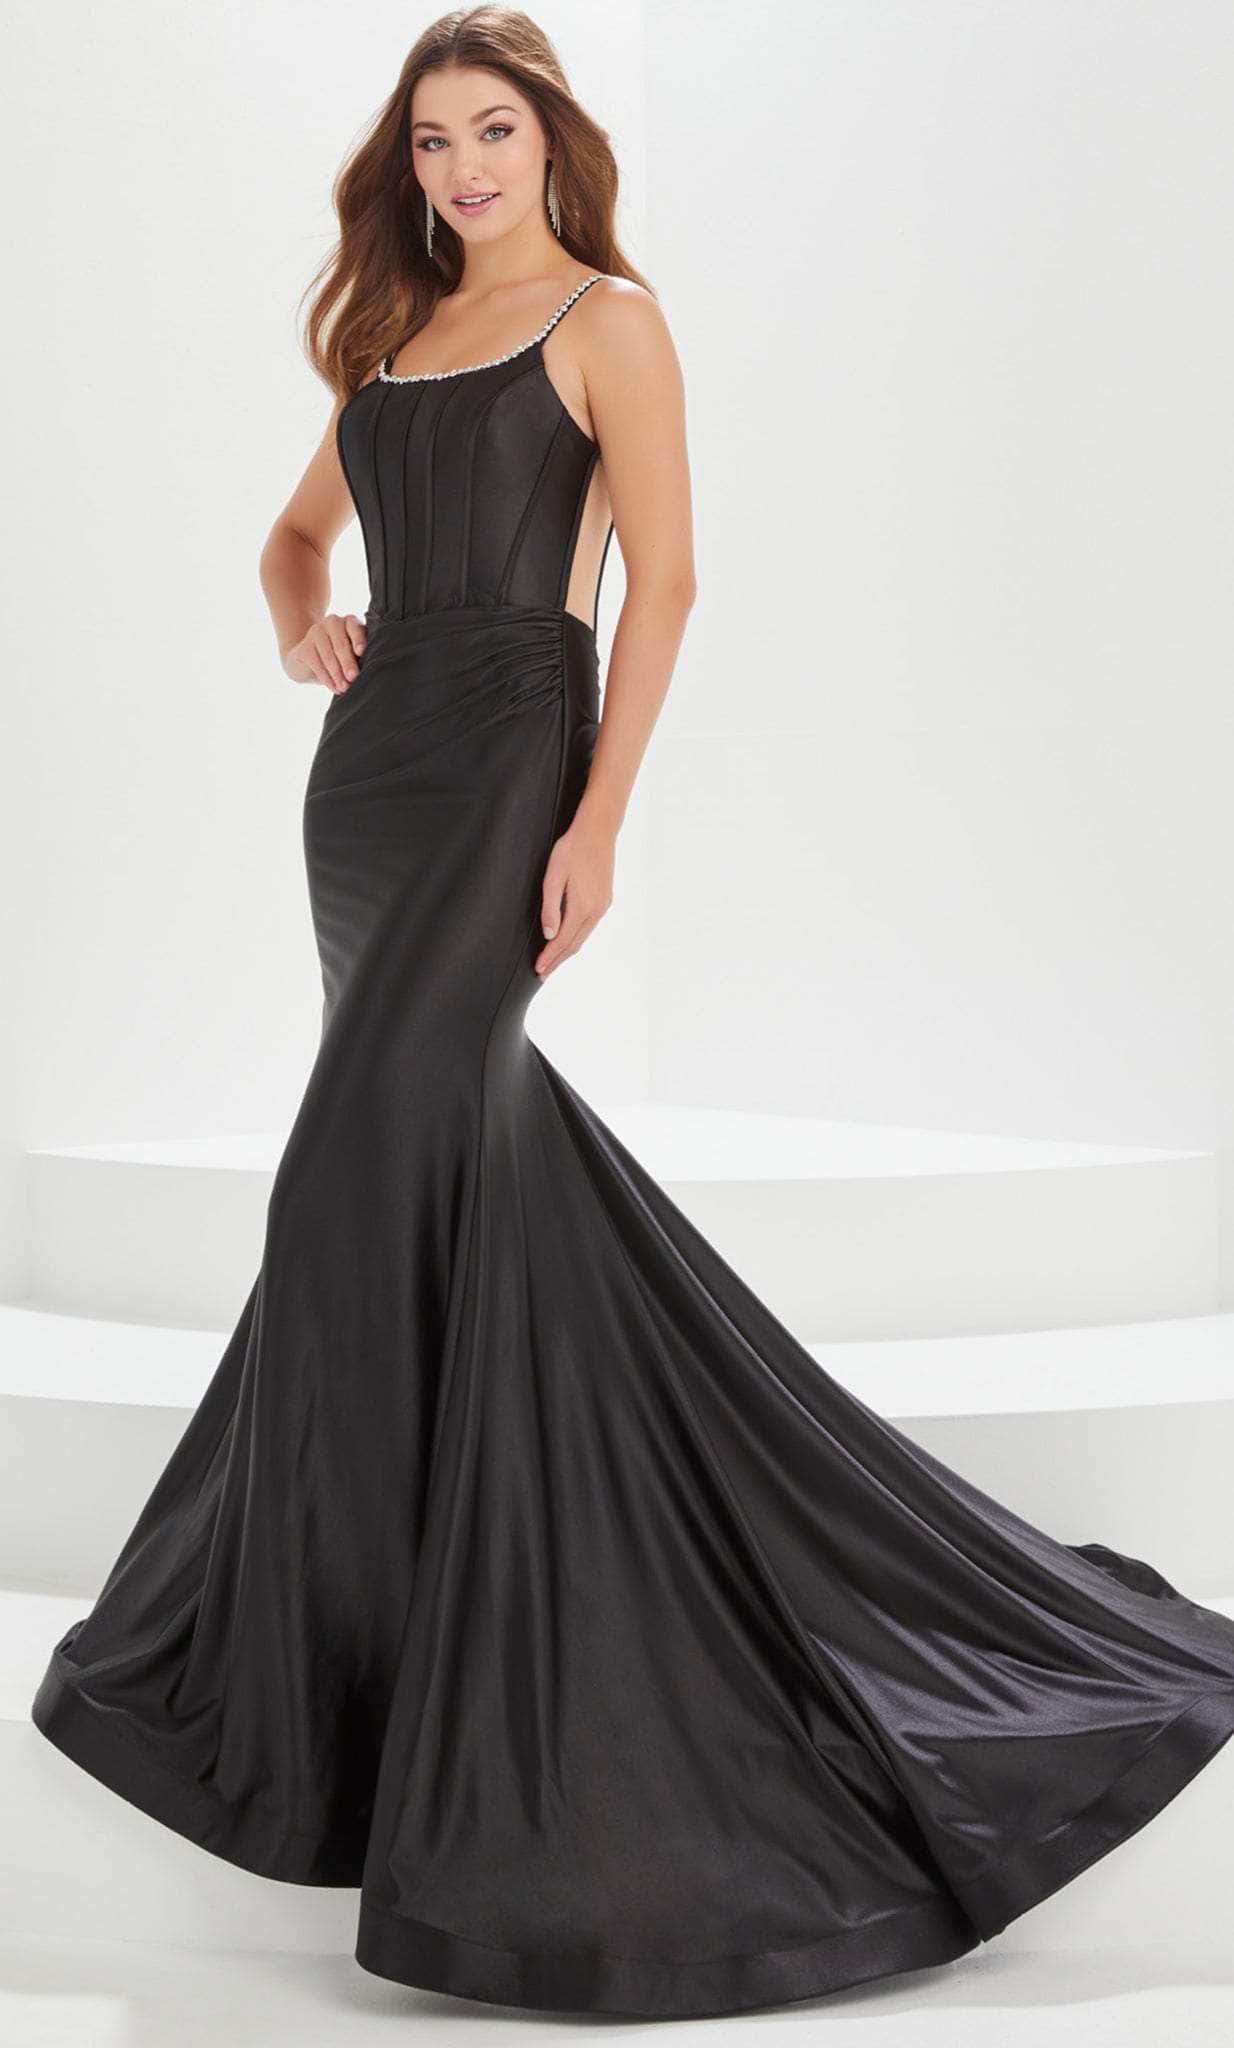 Tiffany Designs by Christina Wu 16003 - Sleeveless Prom Gown
